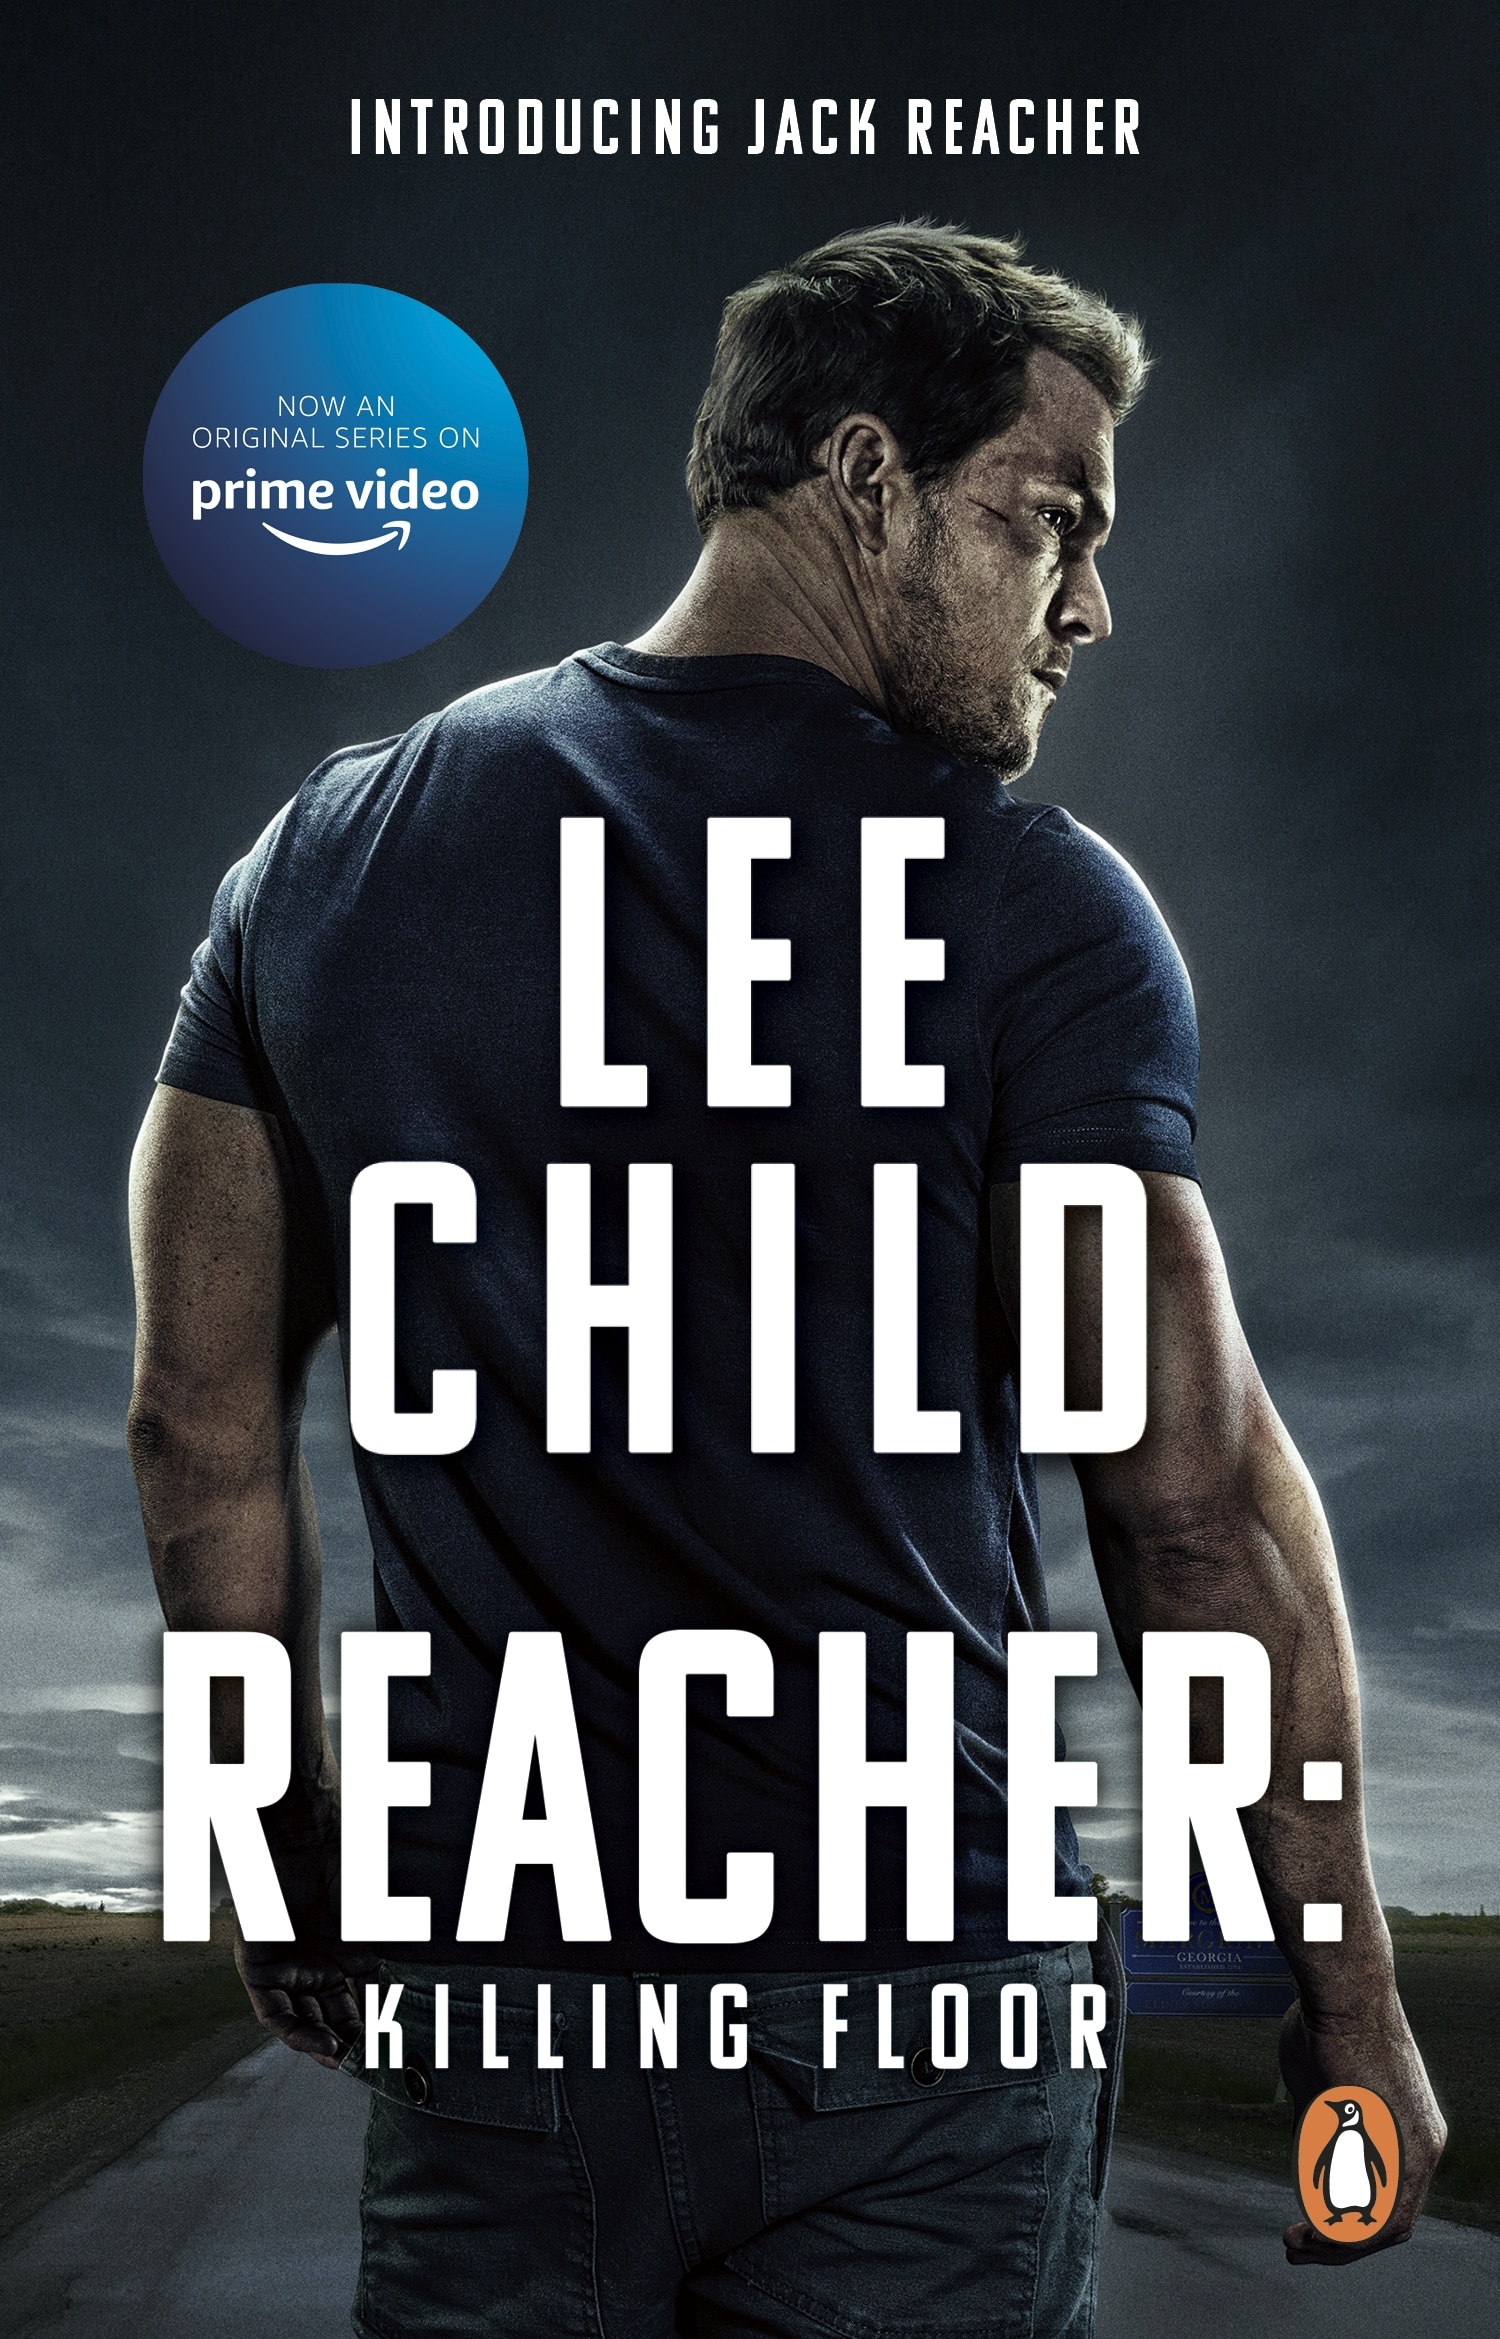 Killing Floor by Lee Child, the book 1 in the Jack Reacher series